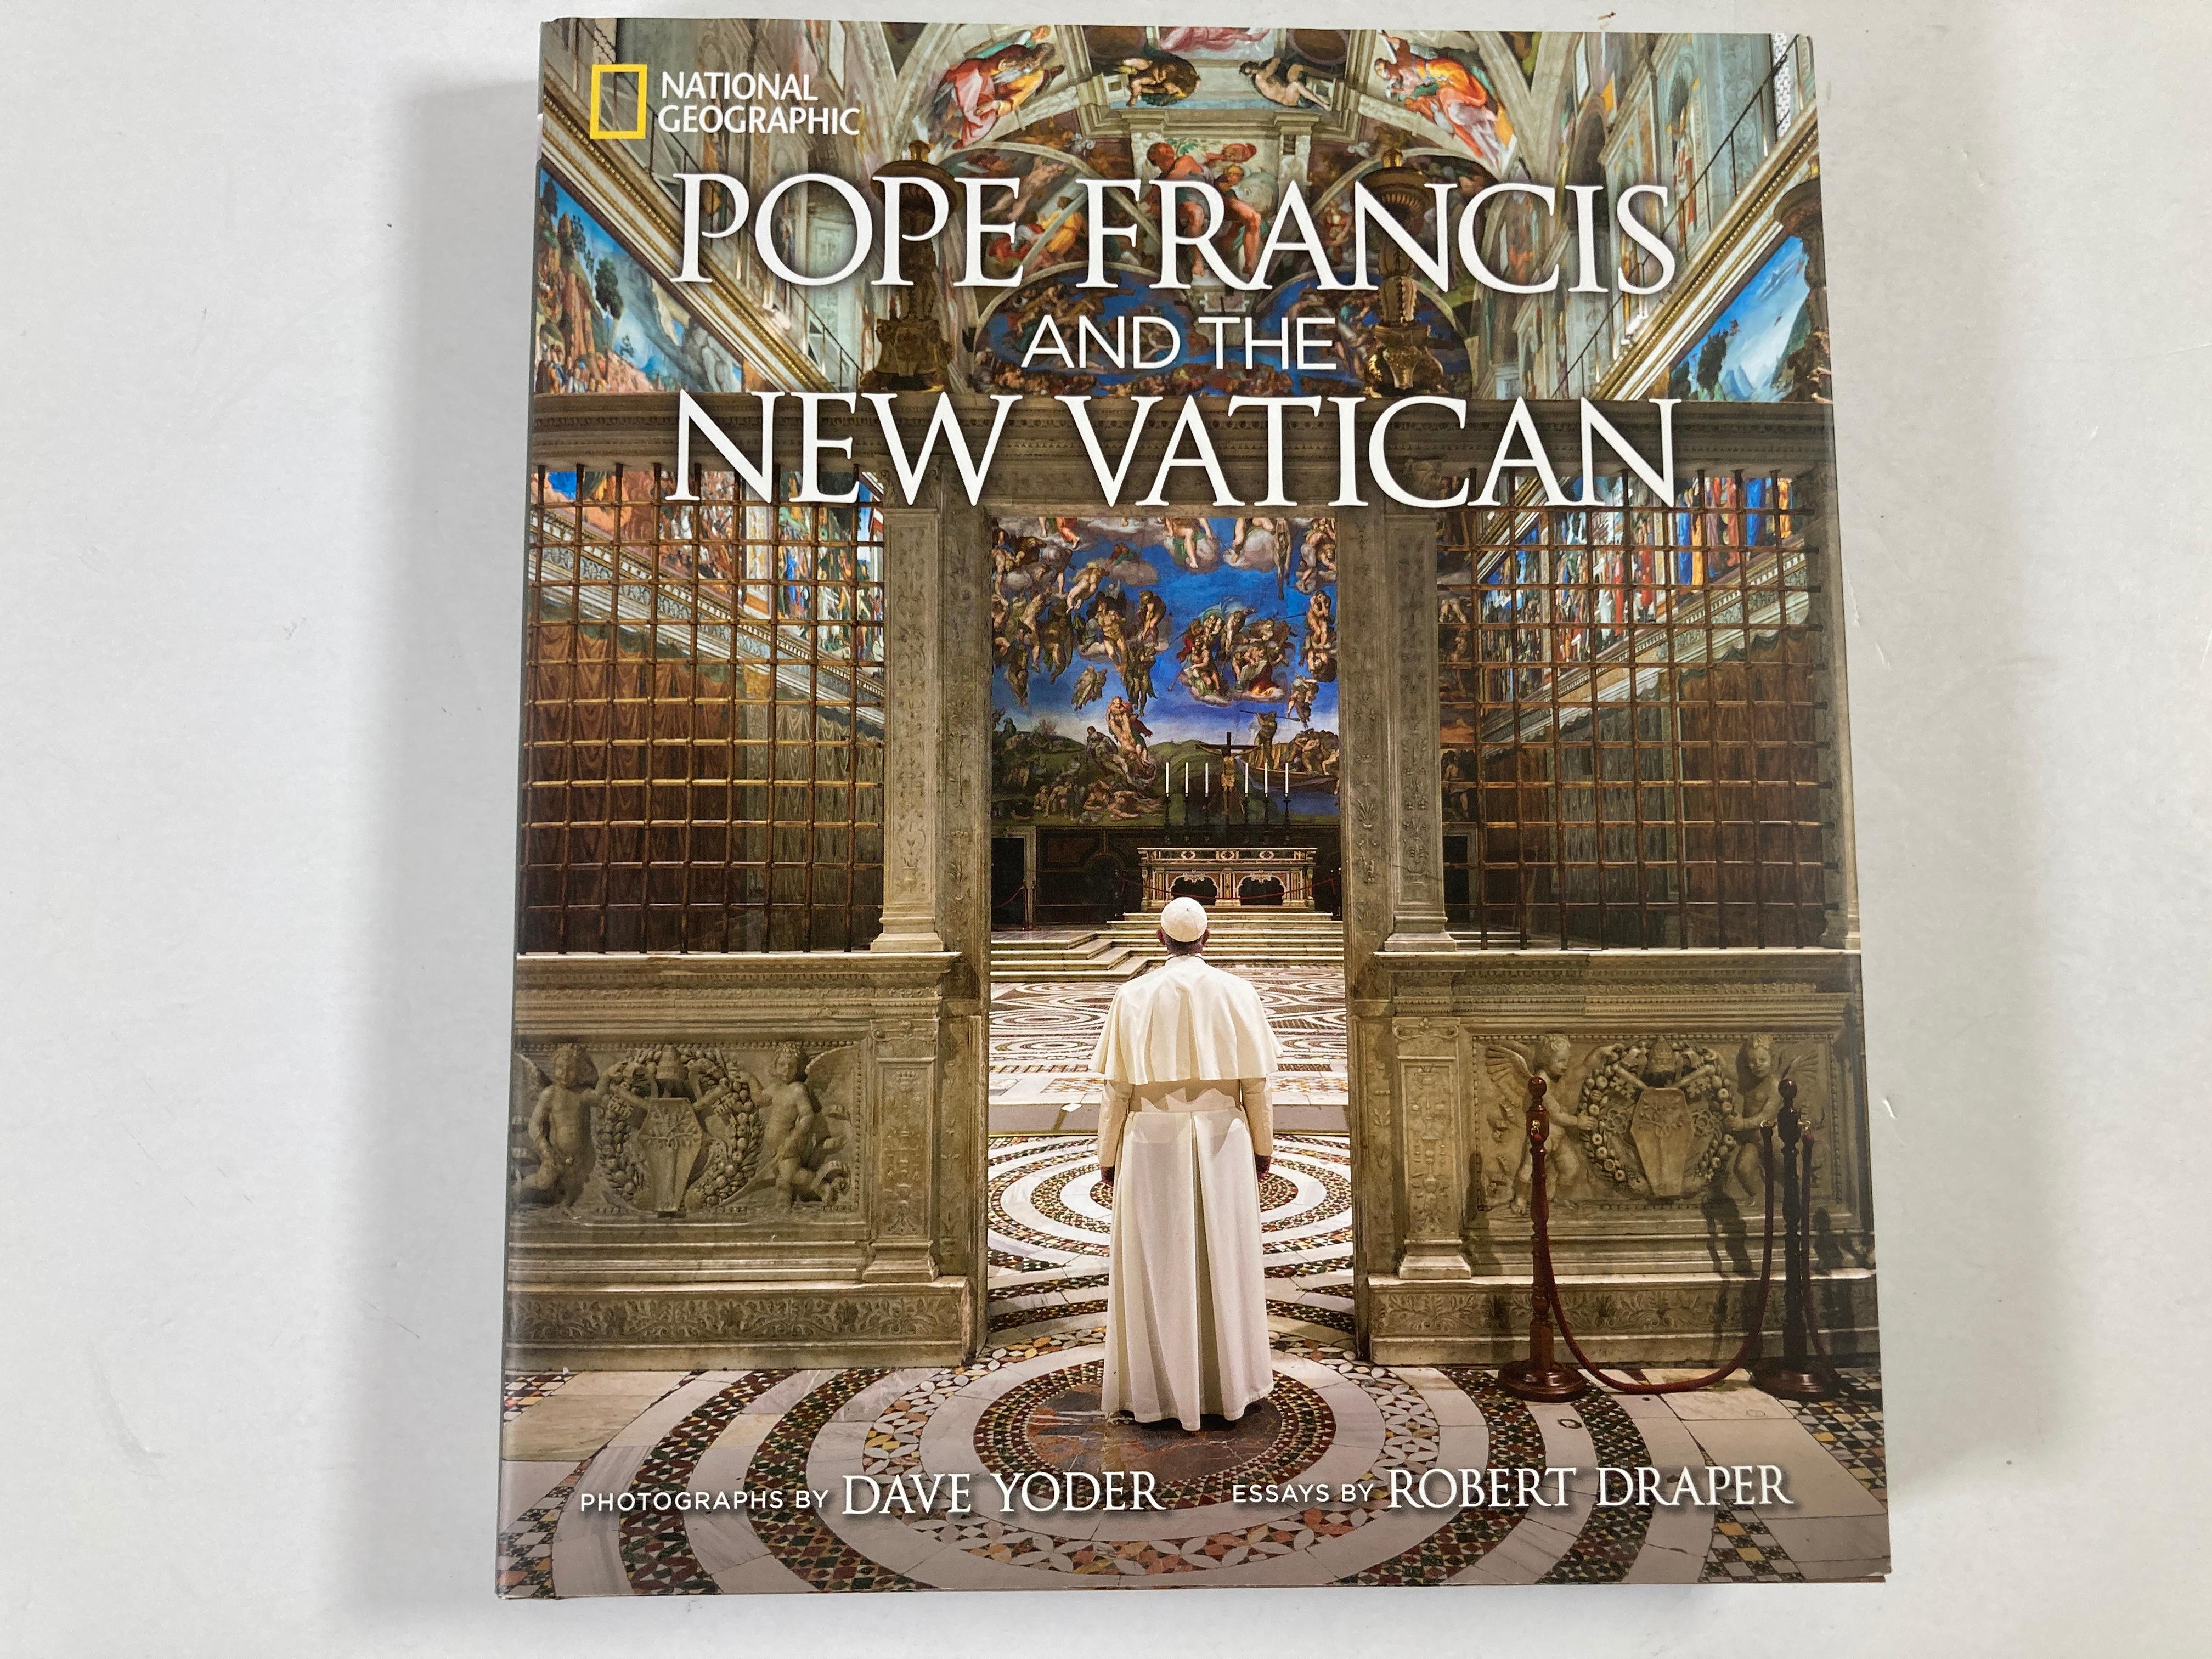 Pope Francis and the New Vatican Draper, Robert hardcover book
Title: Pope Francis and the New Vatican
Publisher: National Geographic
Publication Date: 2015
Binding: Hardcover
Book condition: Very good
Dust jacket condition: Dust jacket